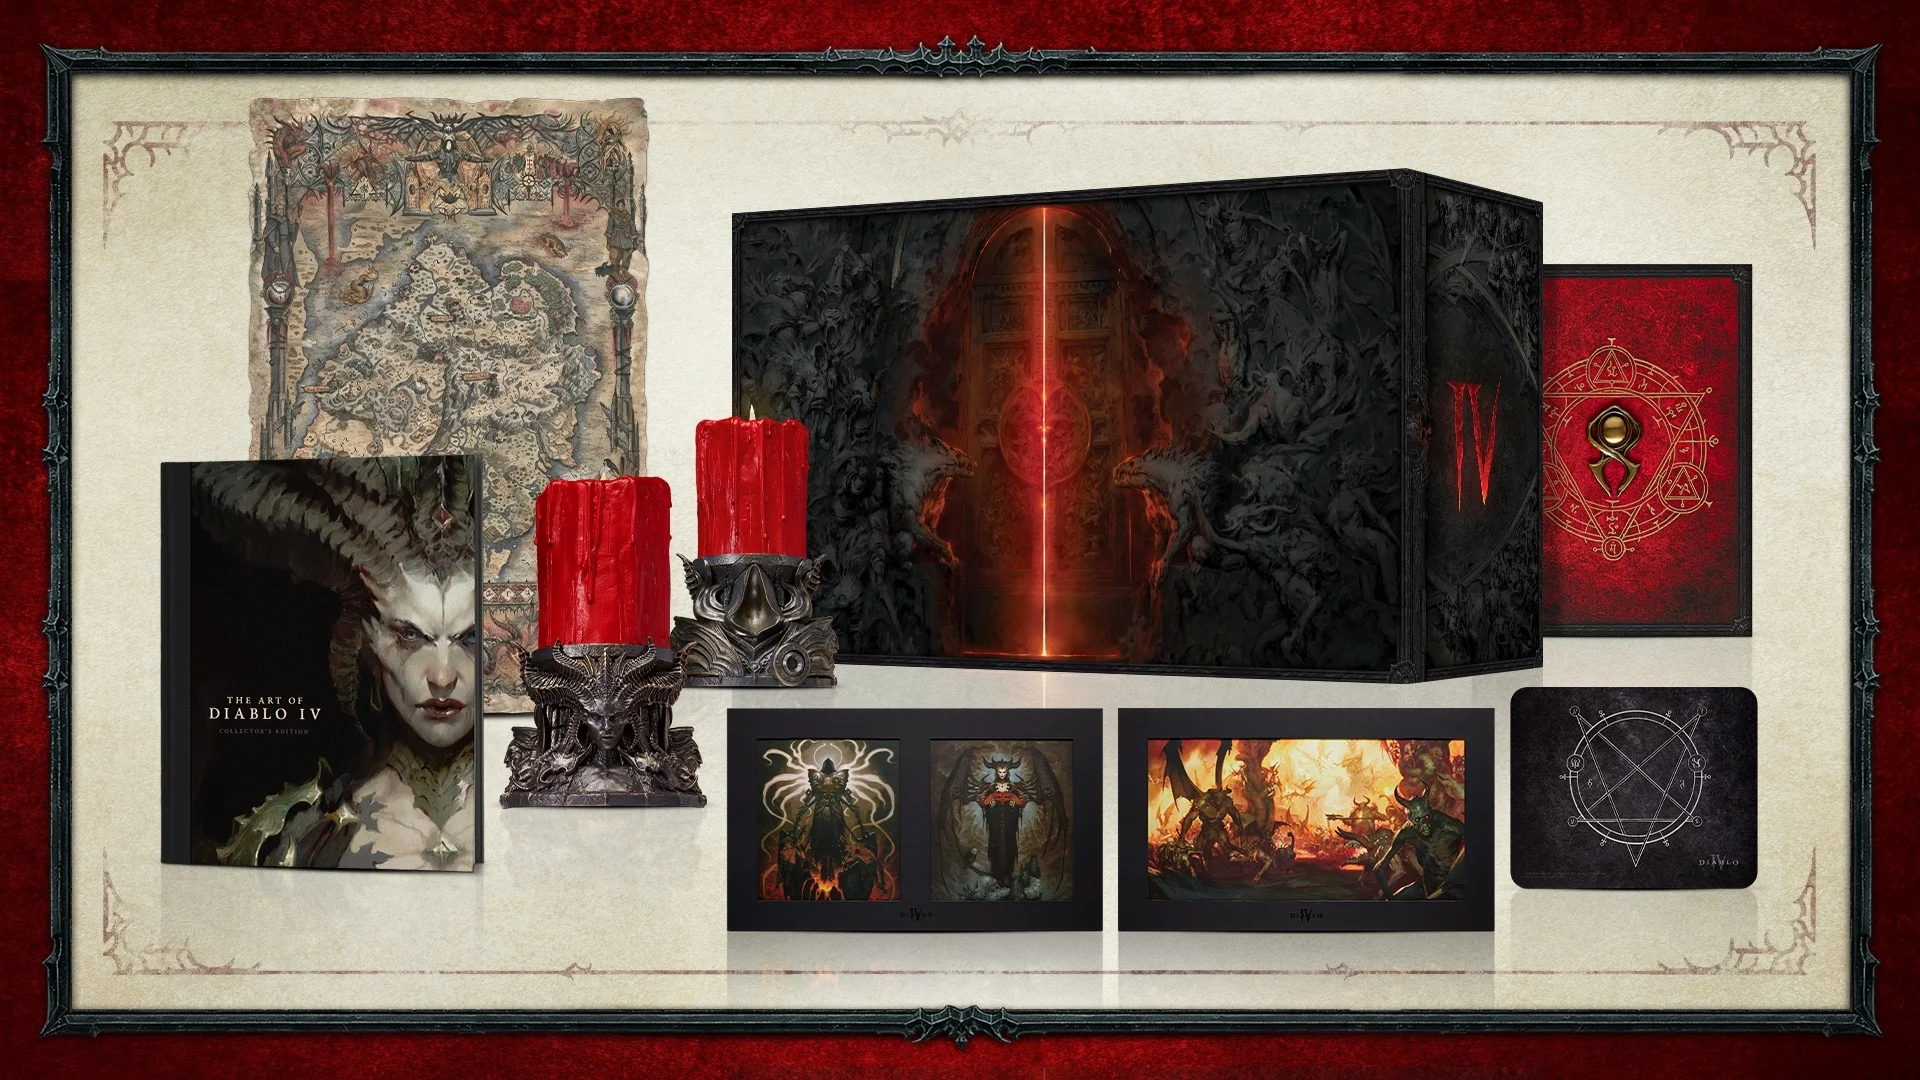 Diablo 4 Collector's Box Available for Pre-Purchase